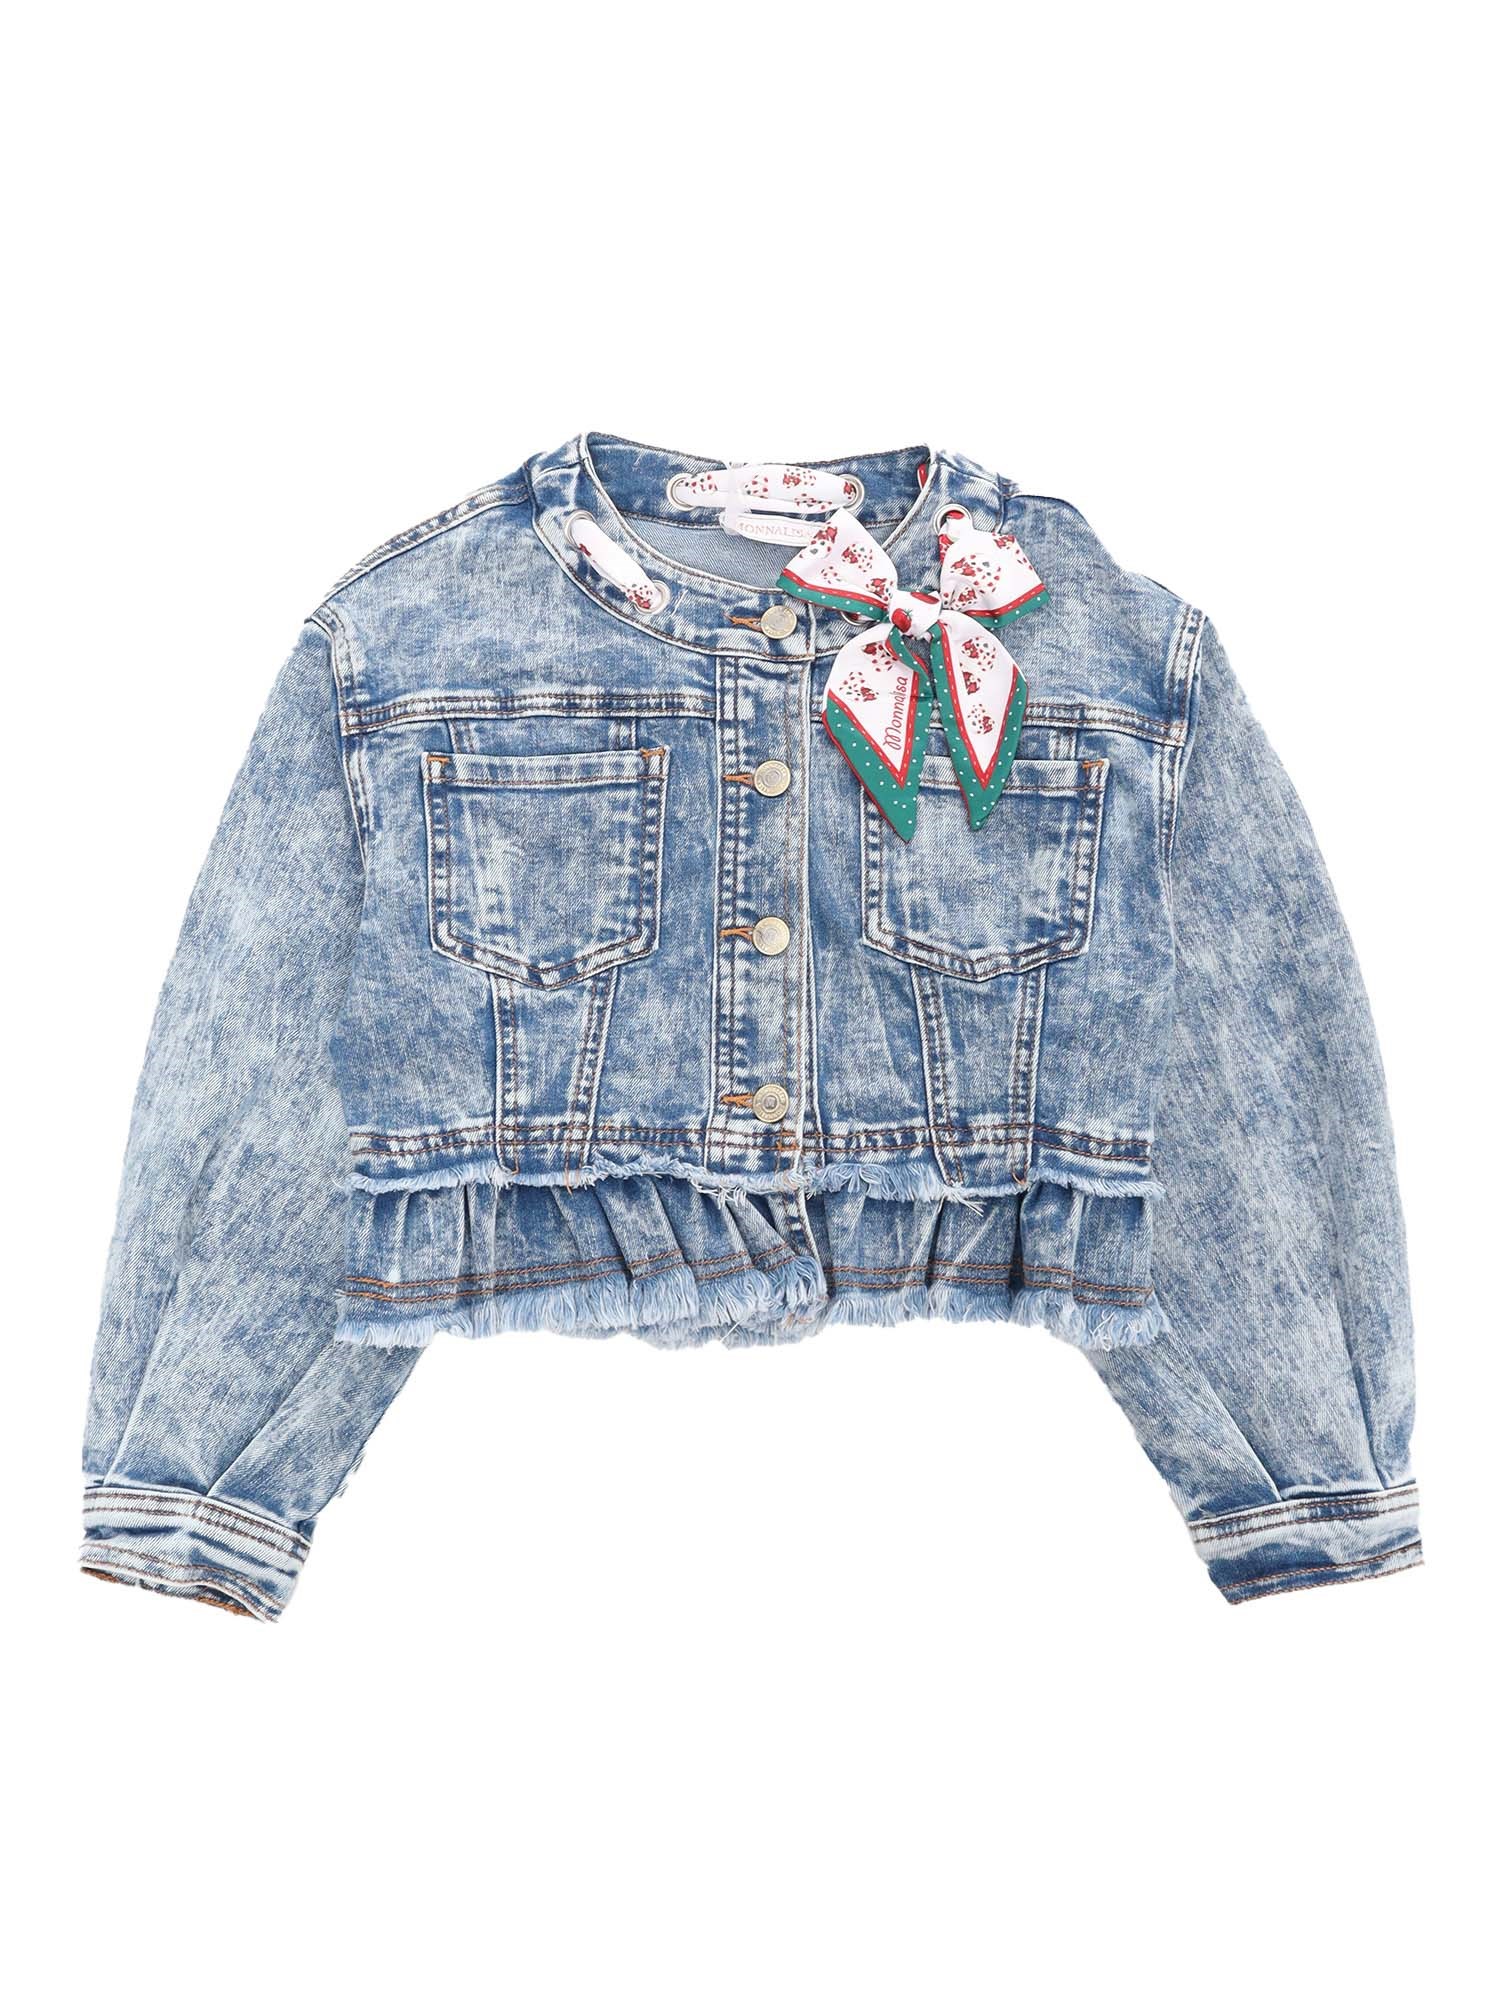 Monnalisa Denim Jacket With Bow In Blue